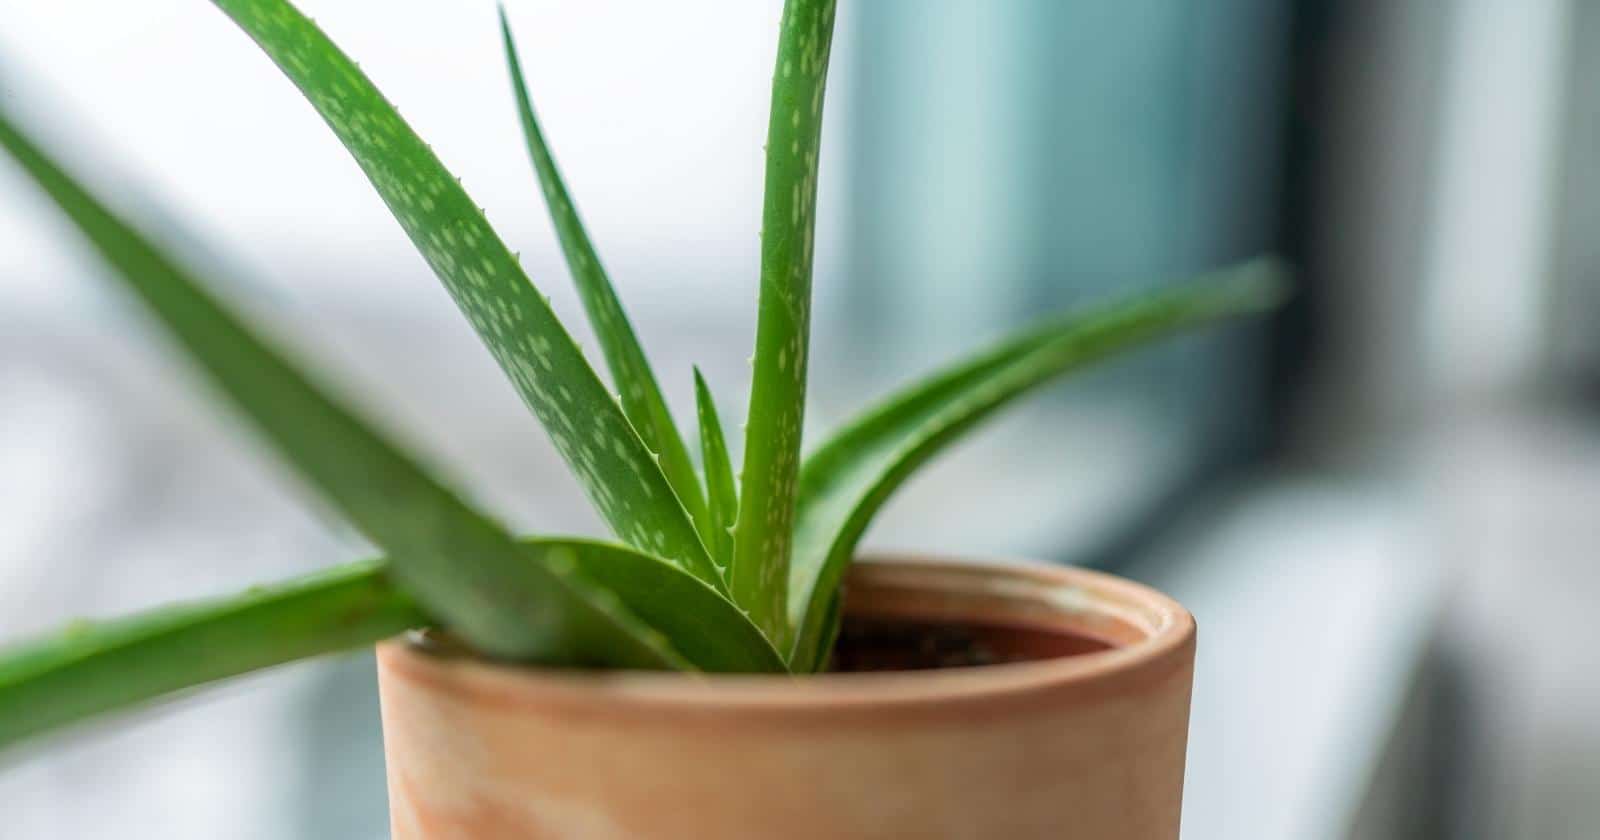 How to Repot Aloe Vera in 7 Simple Steps